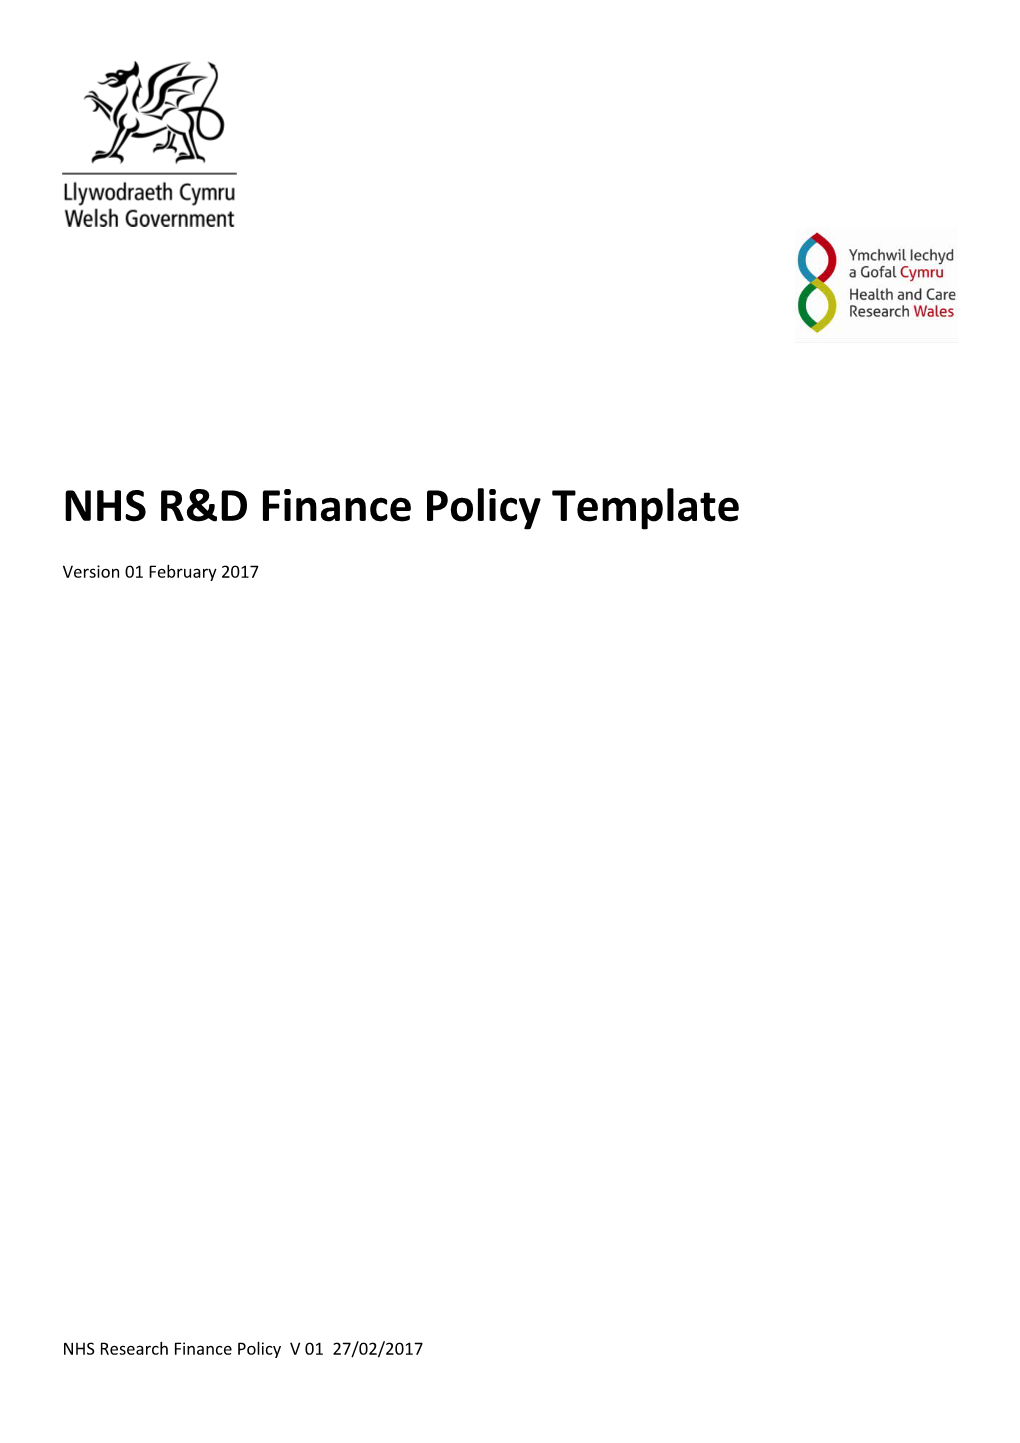 NHS R&D Finance Policy Template